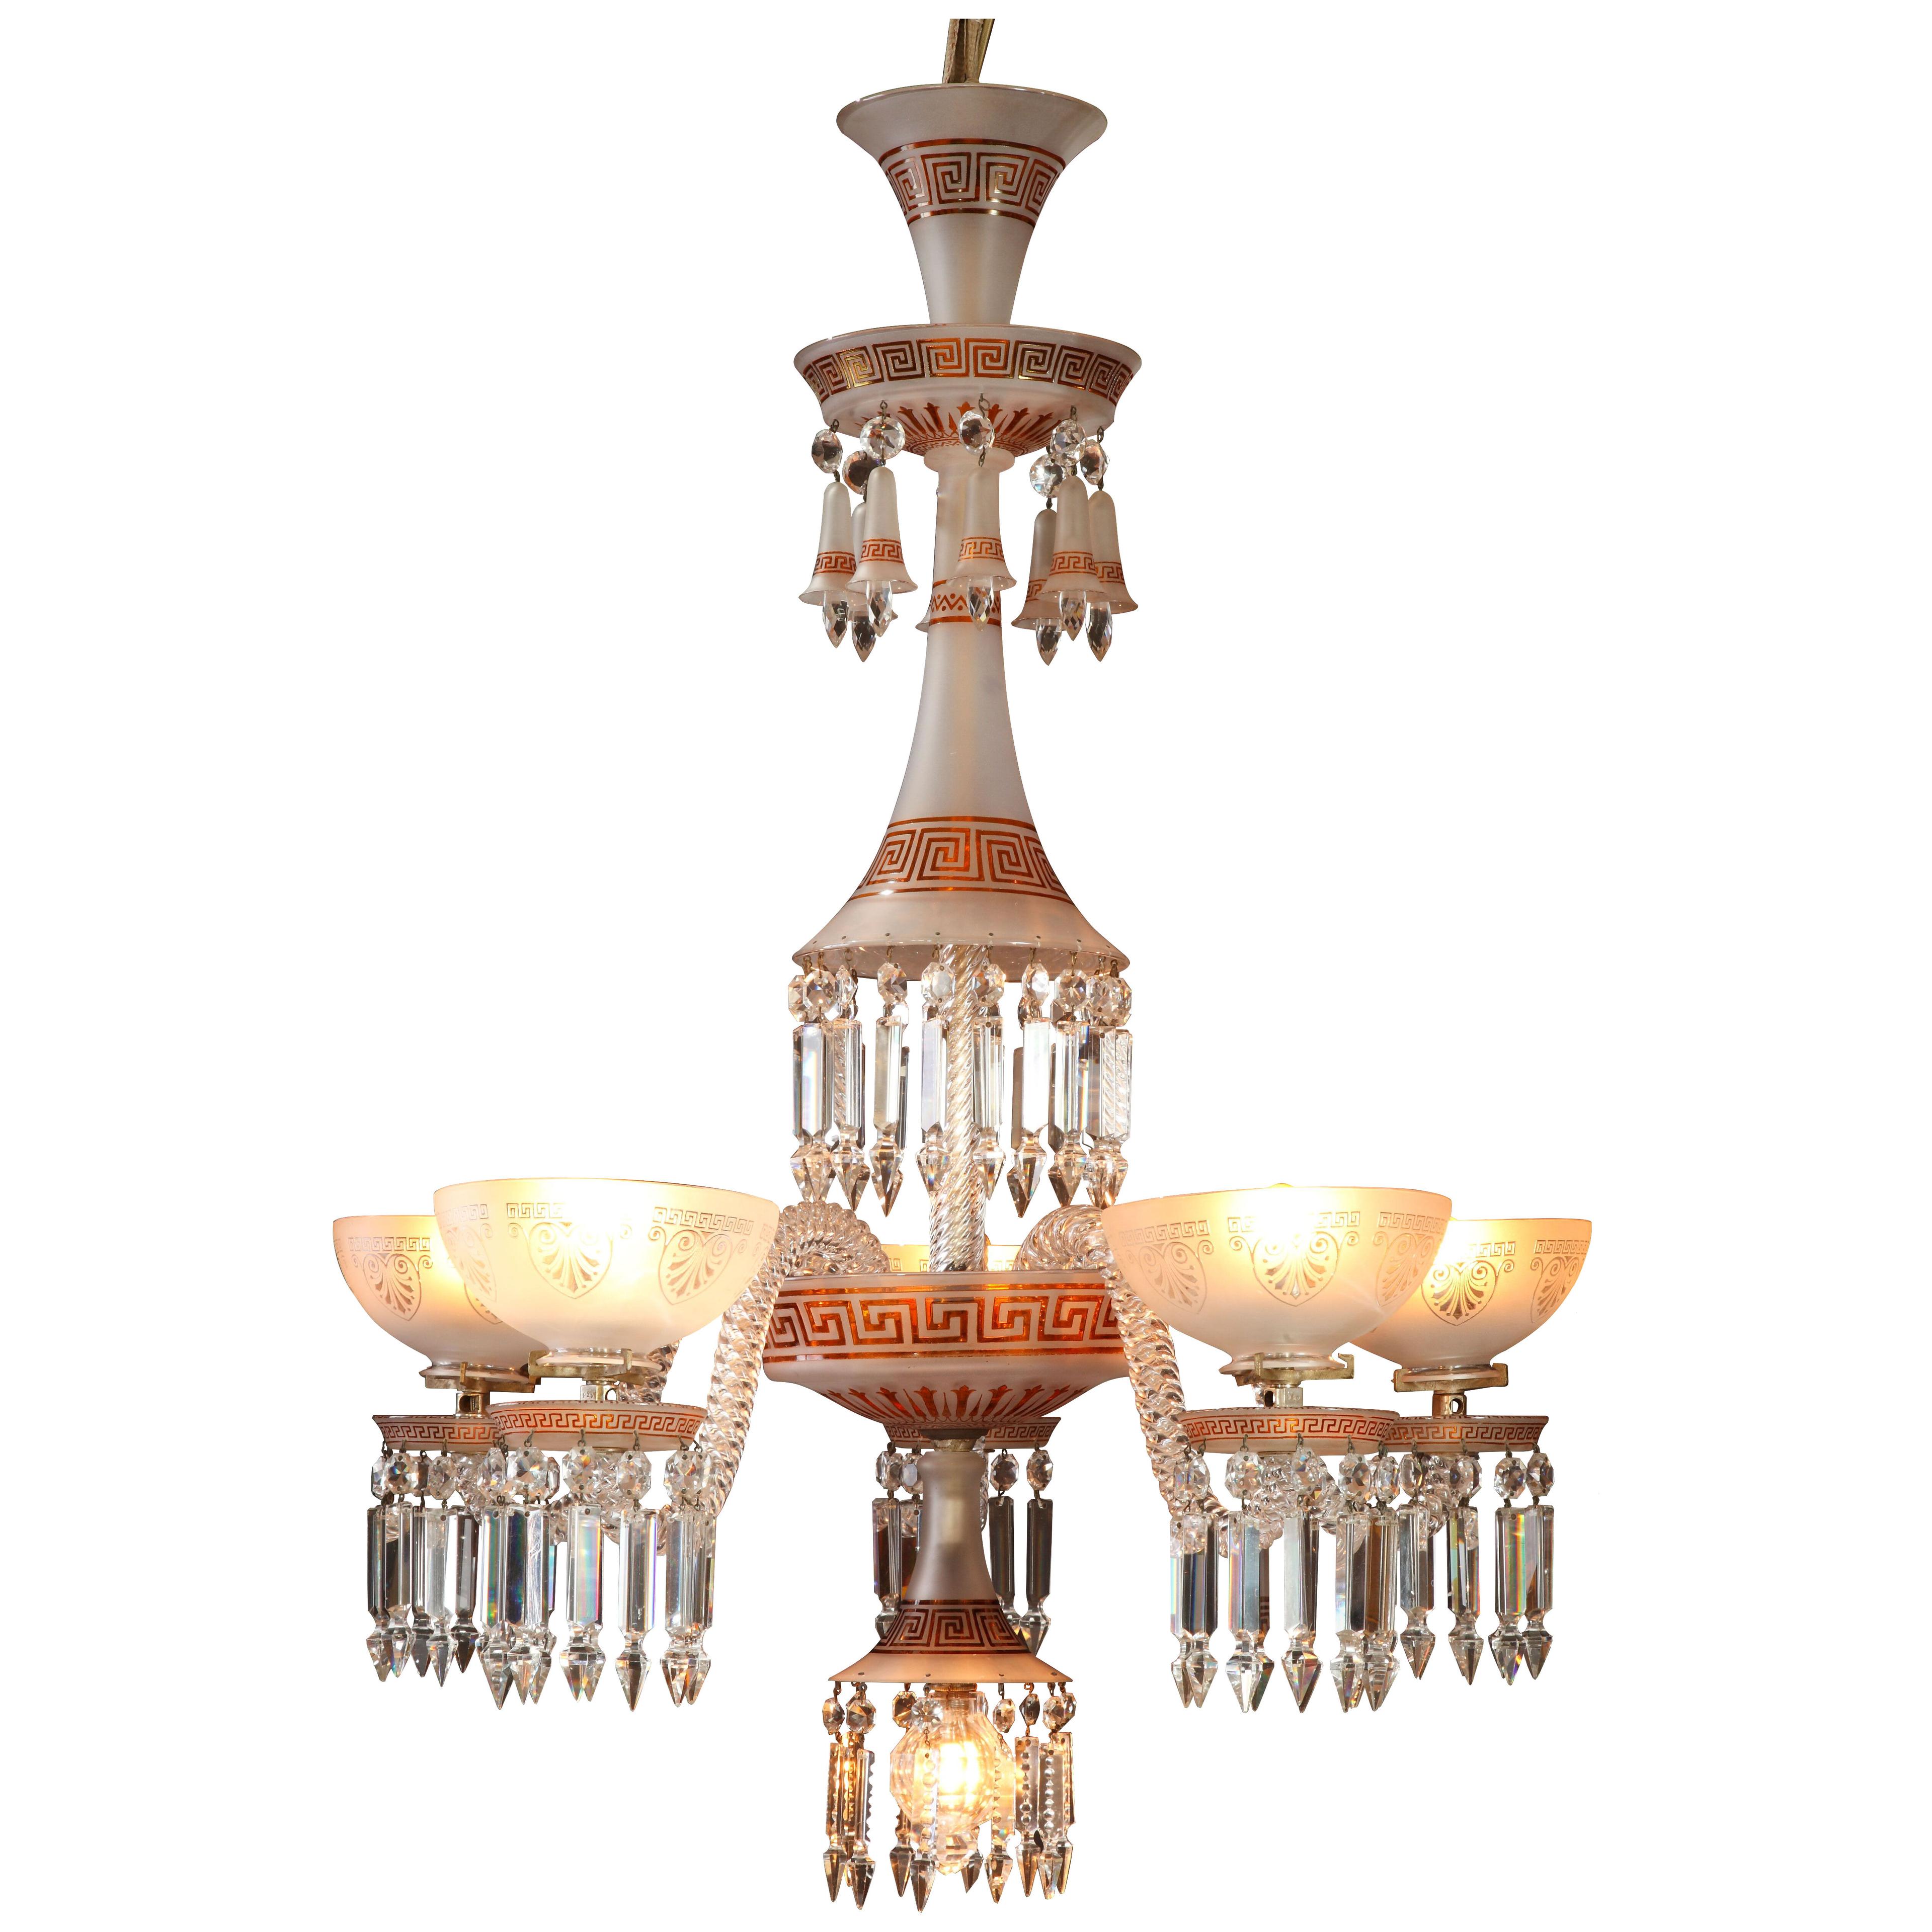 Neo-Greek Opaque Crystal Chandelier Attributed to Baccarat, France, Circa 1890